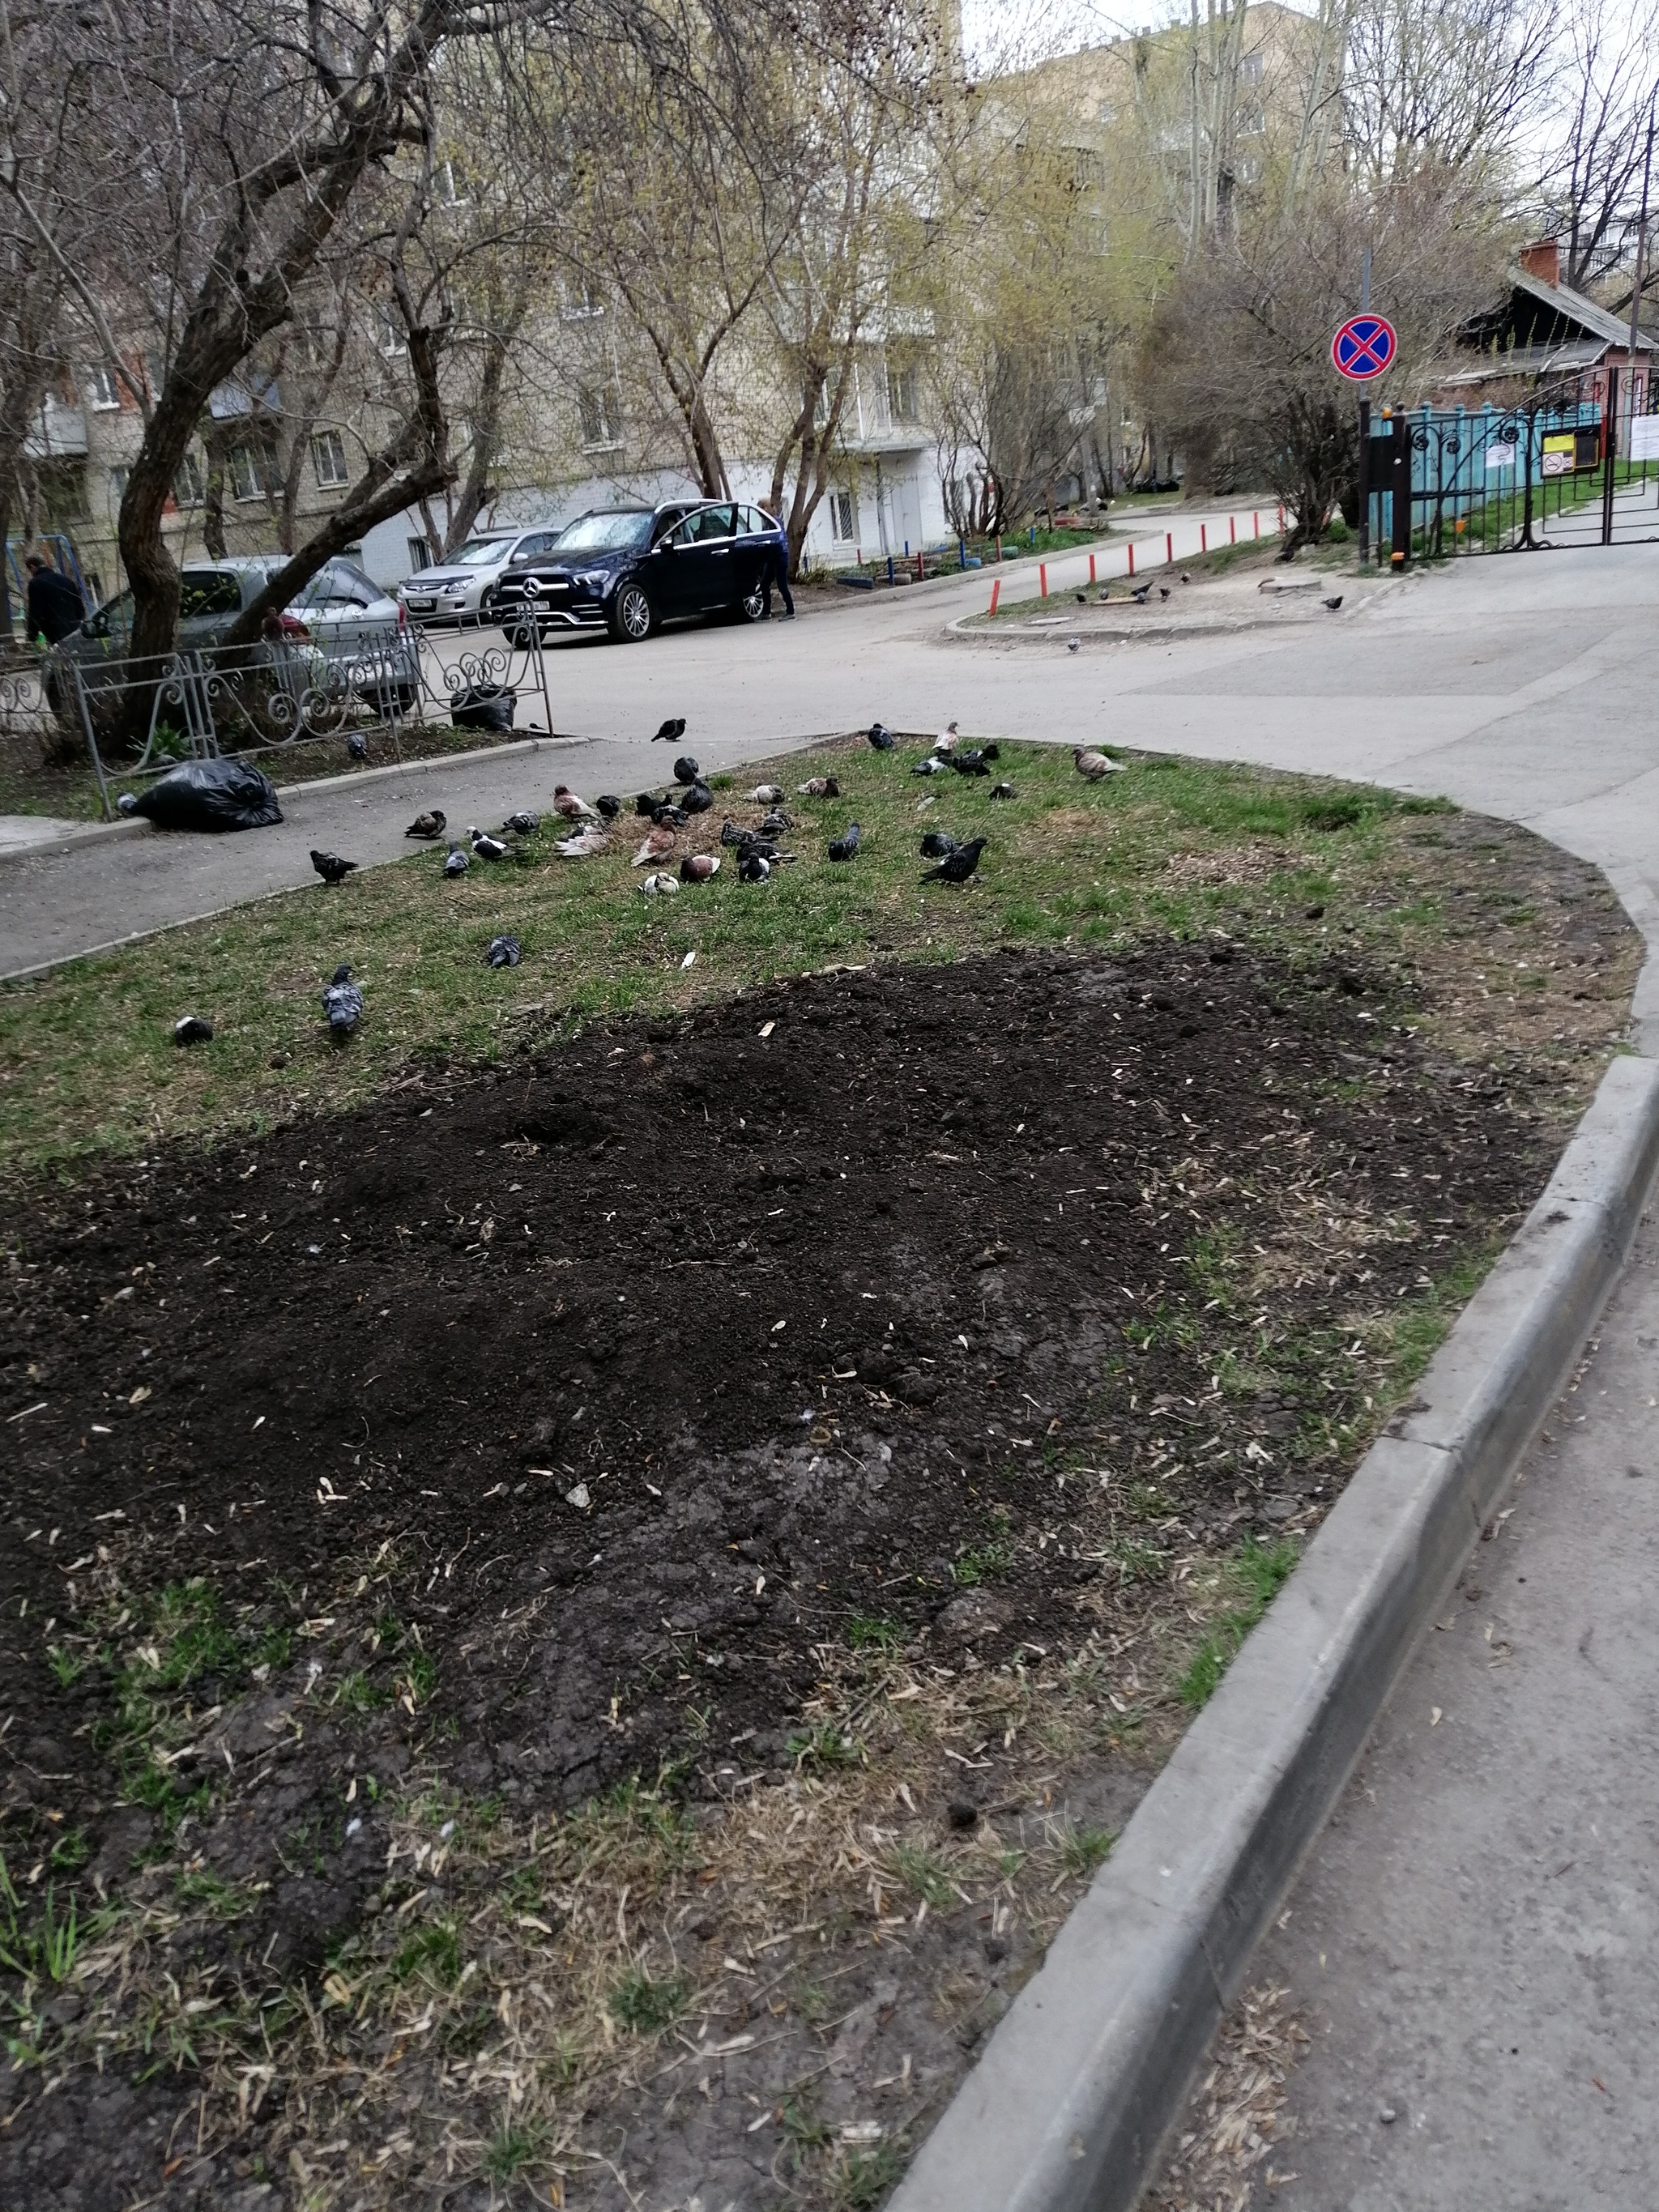 How to get rid of pigeons? - Pigeon, Litter, Madness, Cleaning, Adjacent territory, Help, Dirt, Beautification, Longpost